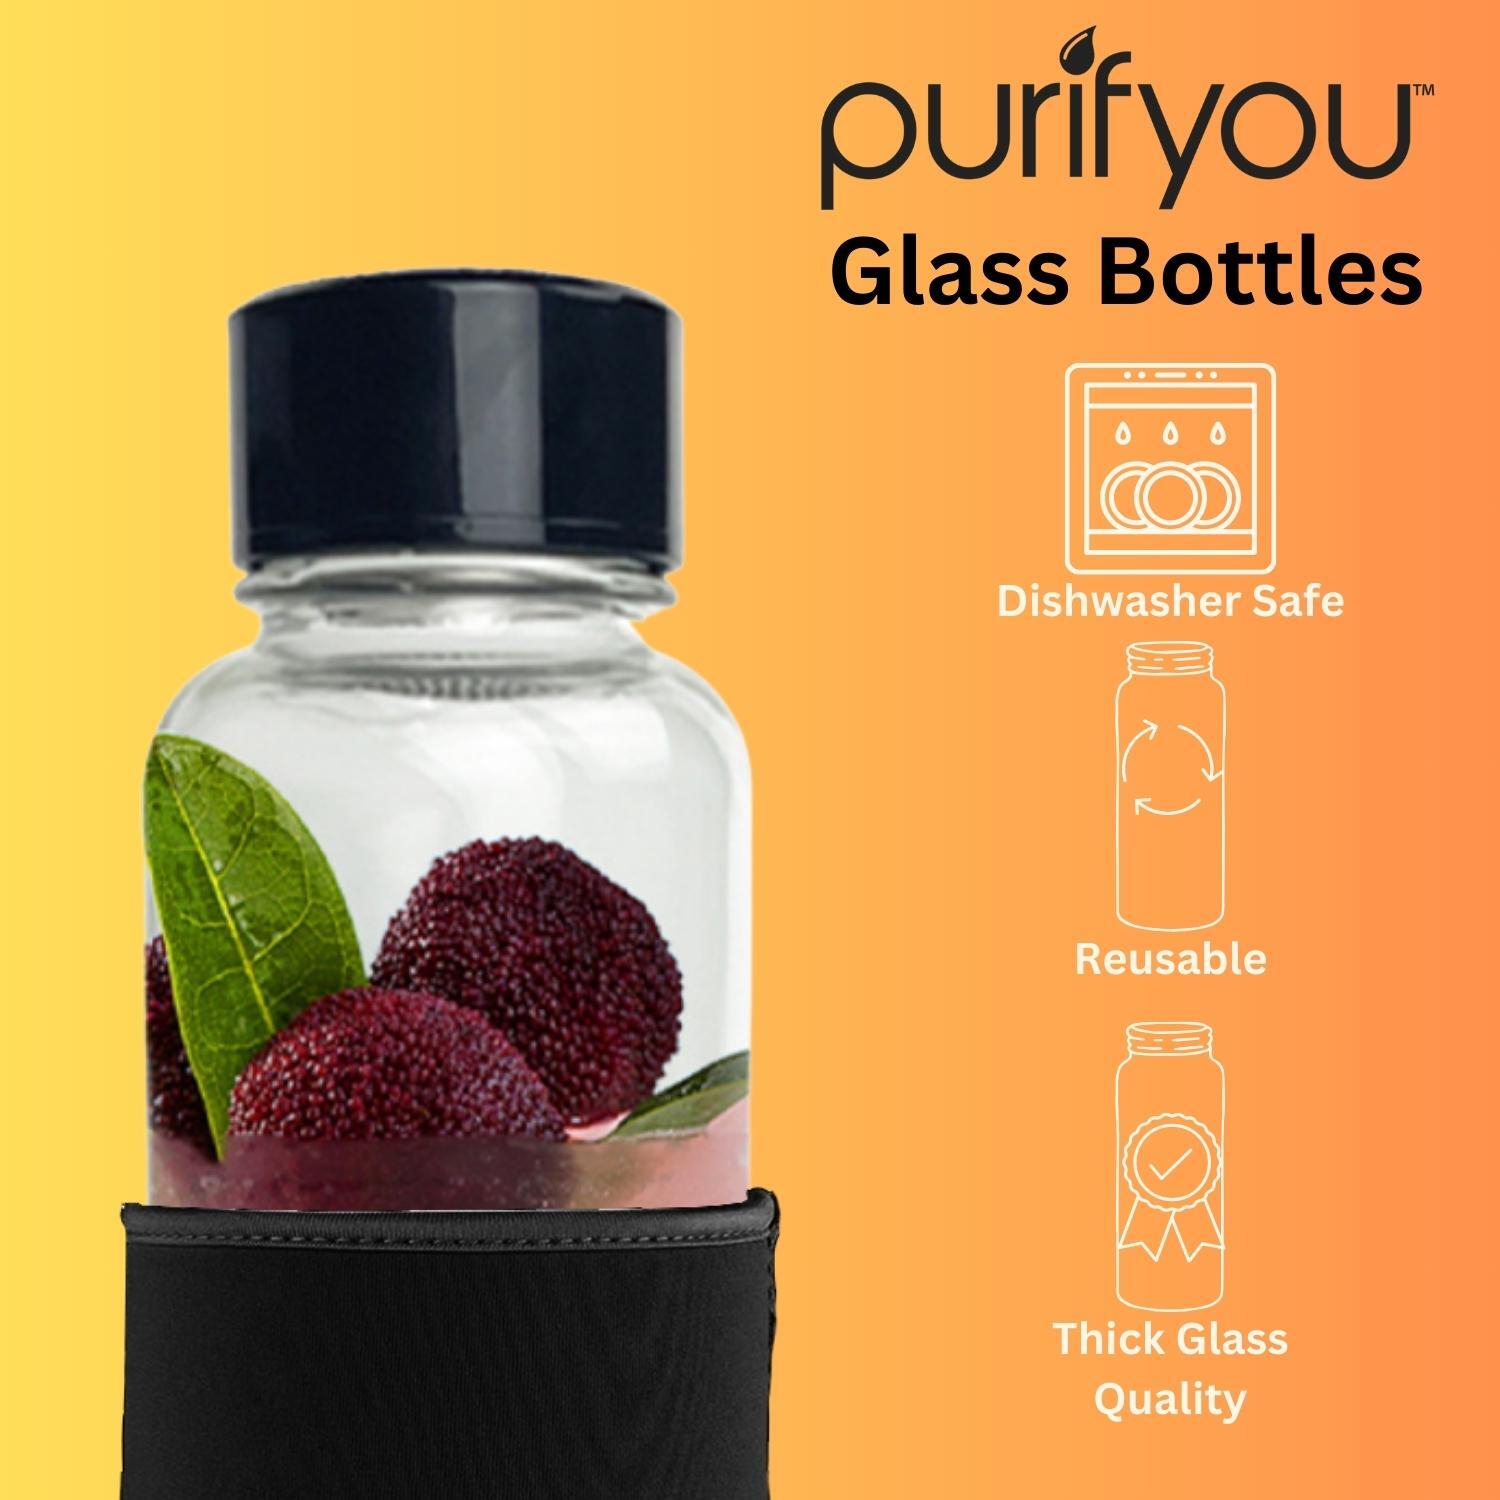  All About Juicing Clear Glass Water Bottles Set - 6